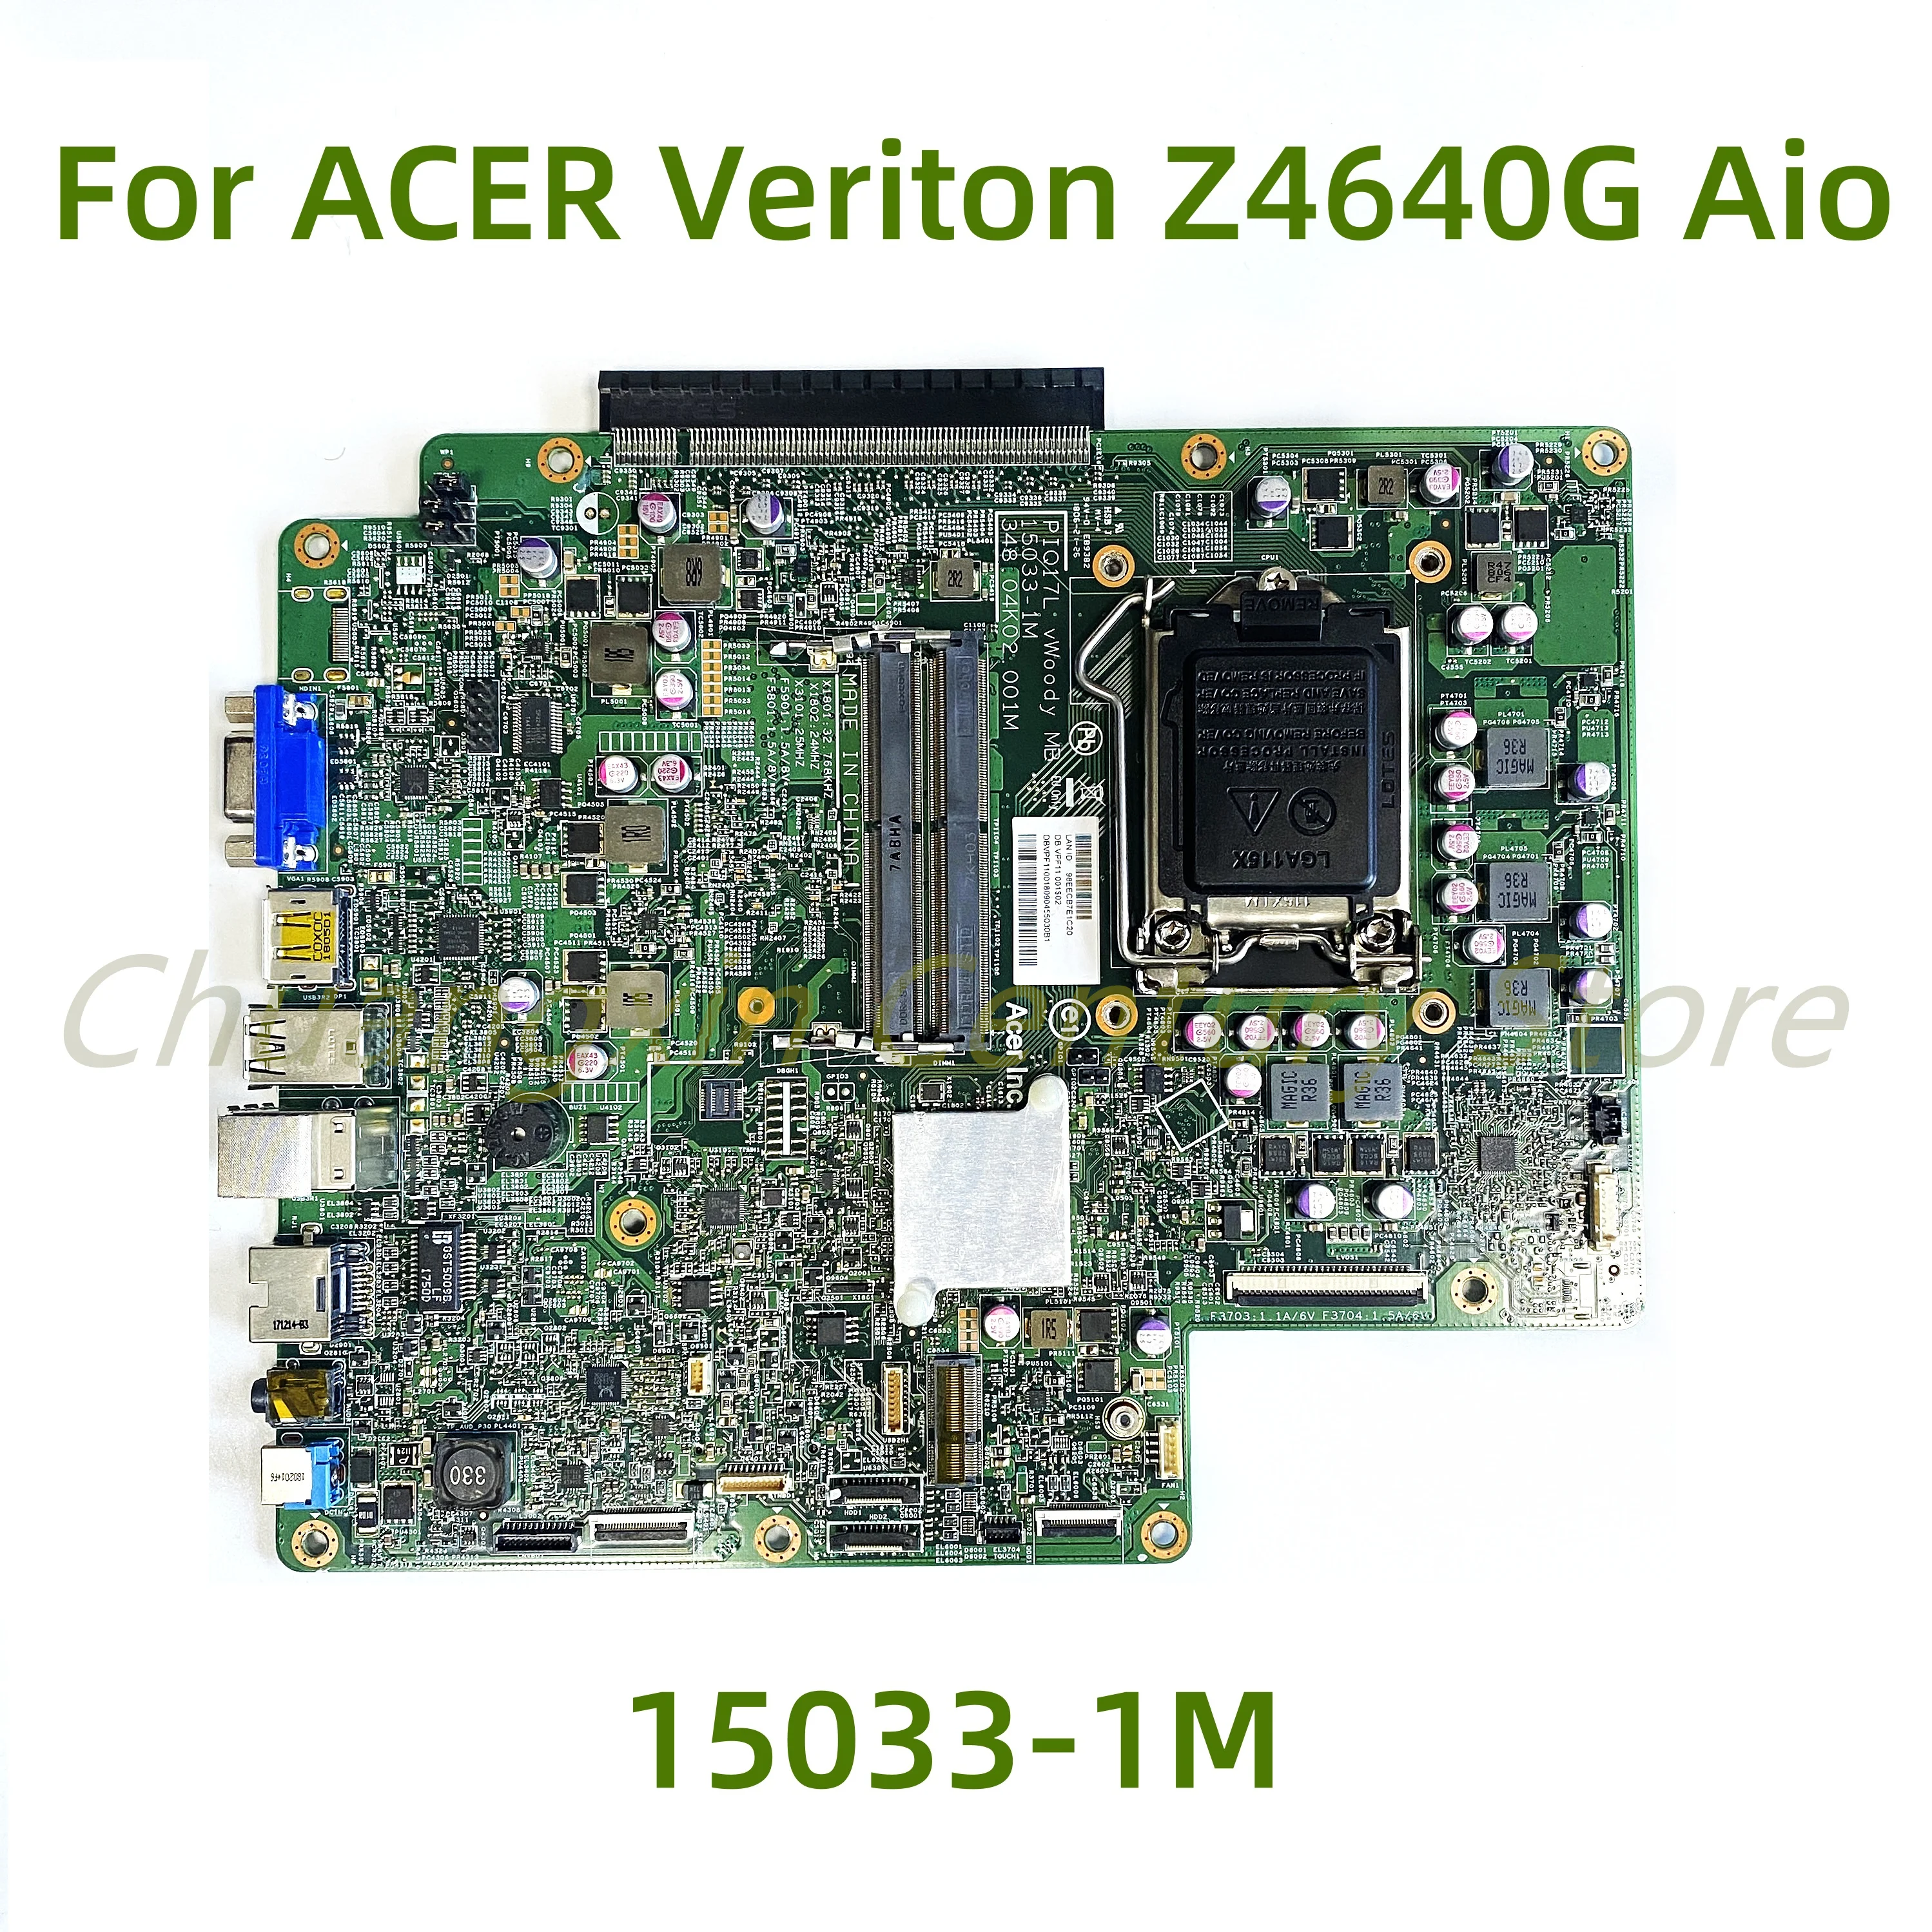 

Suitable for ACER Veriton Z4640G Aio laptop motherboard PIQ17L 15033-1M 348.04K02.001M DDR4 100% Tested Fully Work